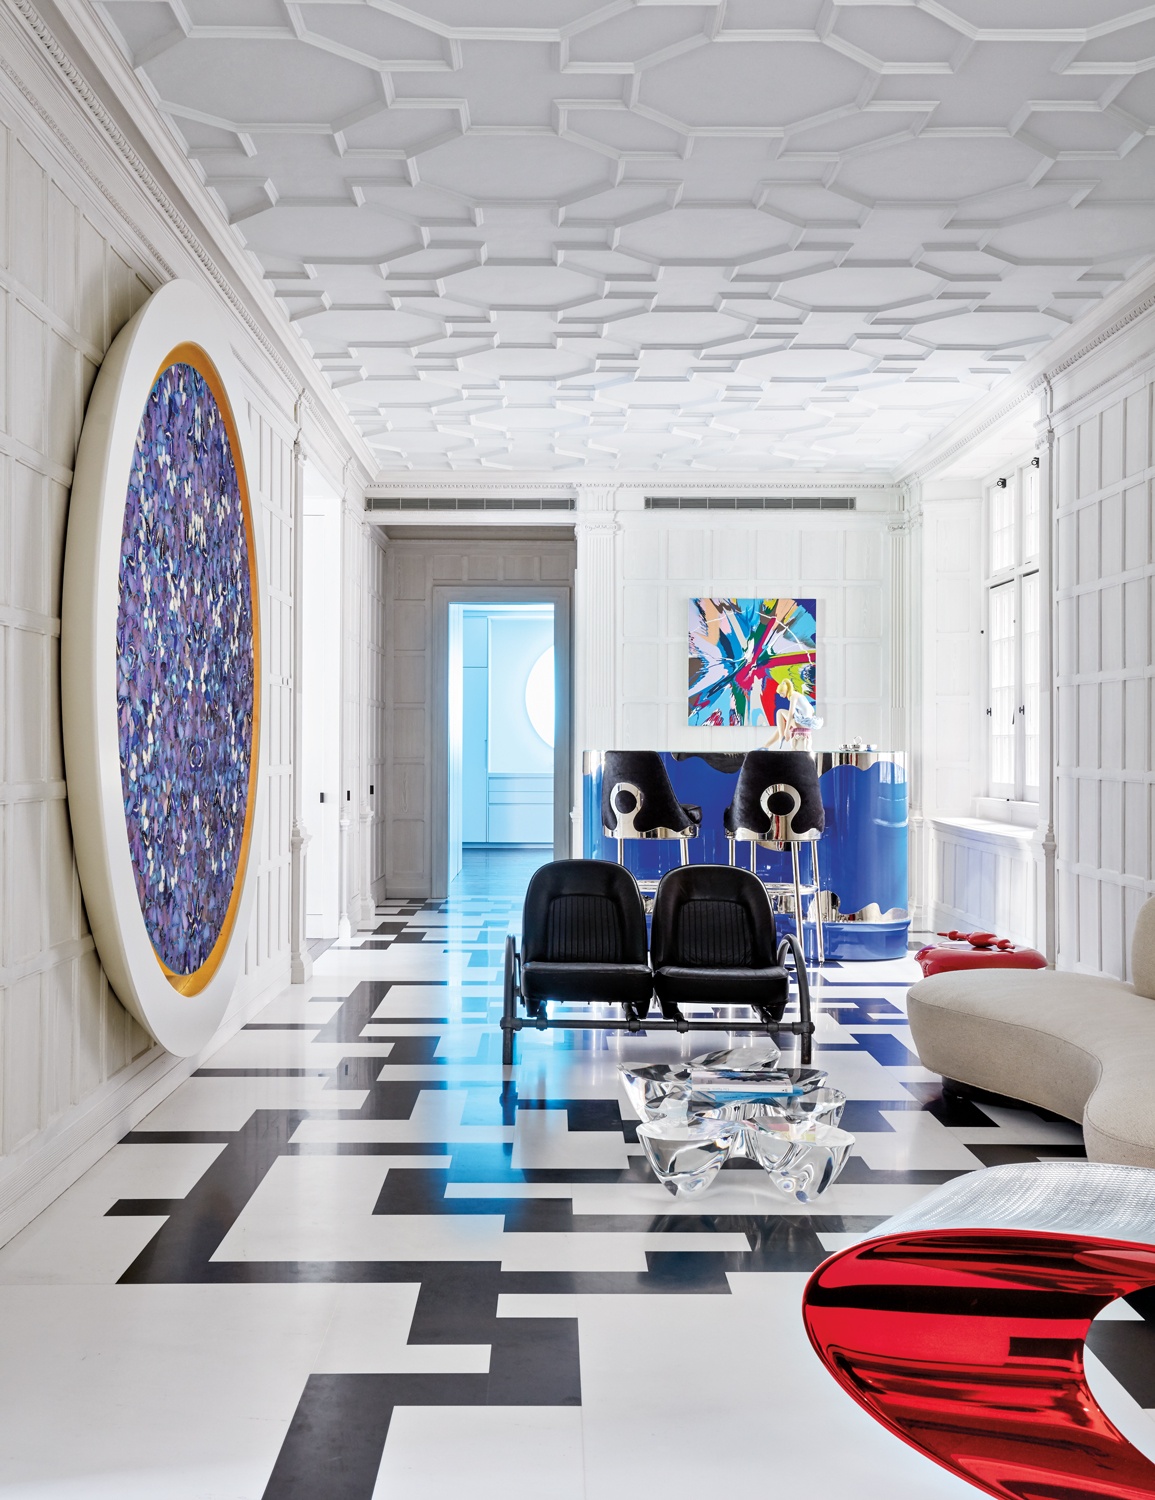 The entrance gallery of Stacey Bronfman’s home in a landmark New York City building, designer Jacques Grange